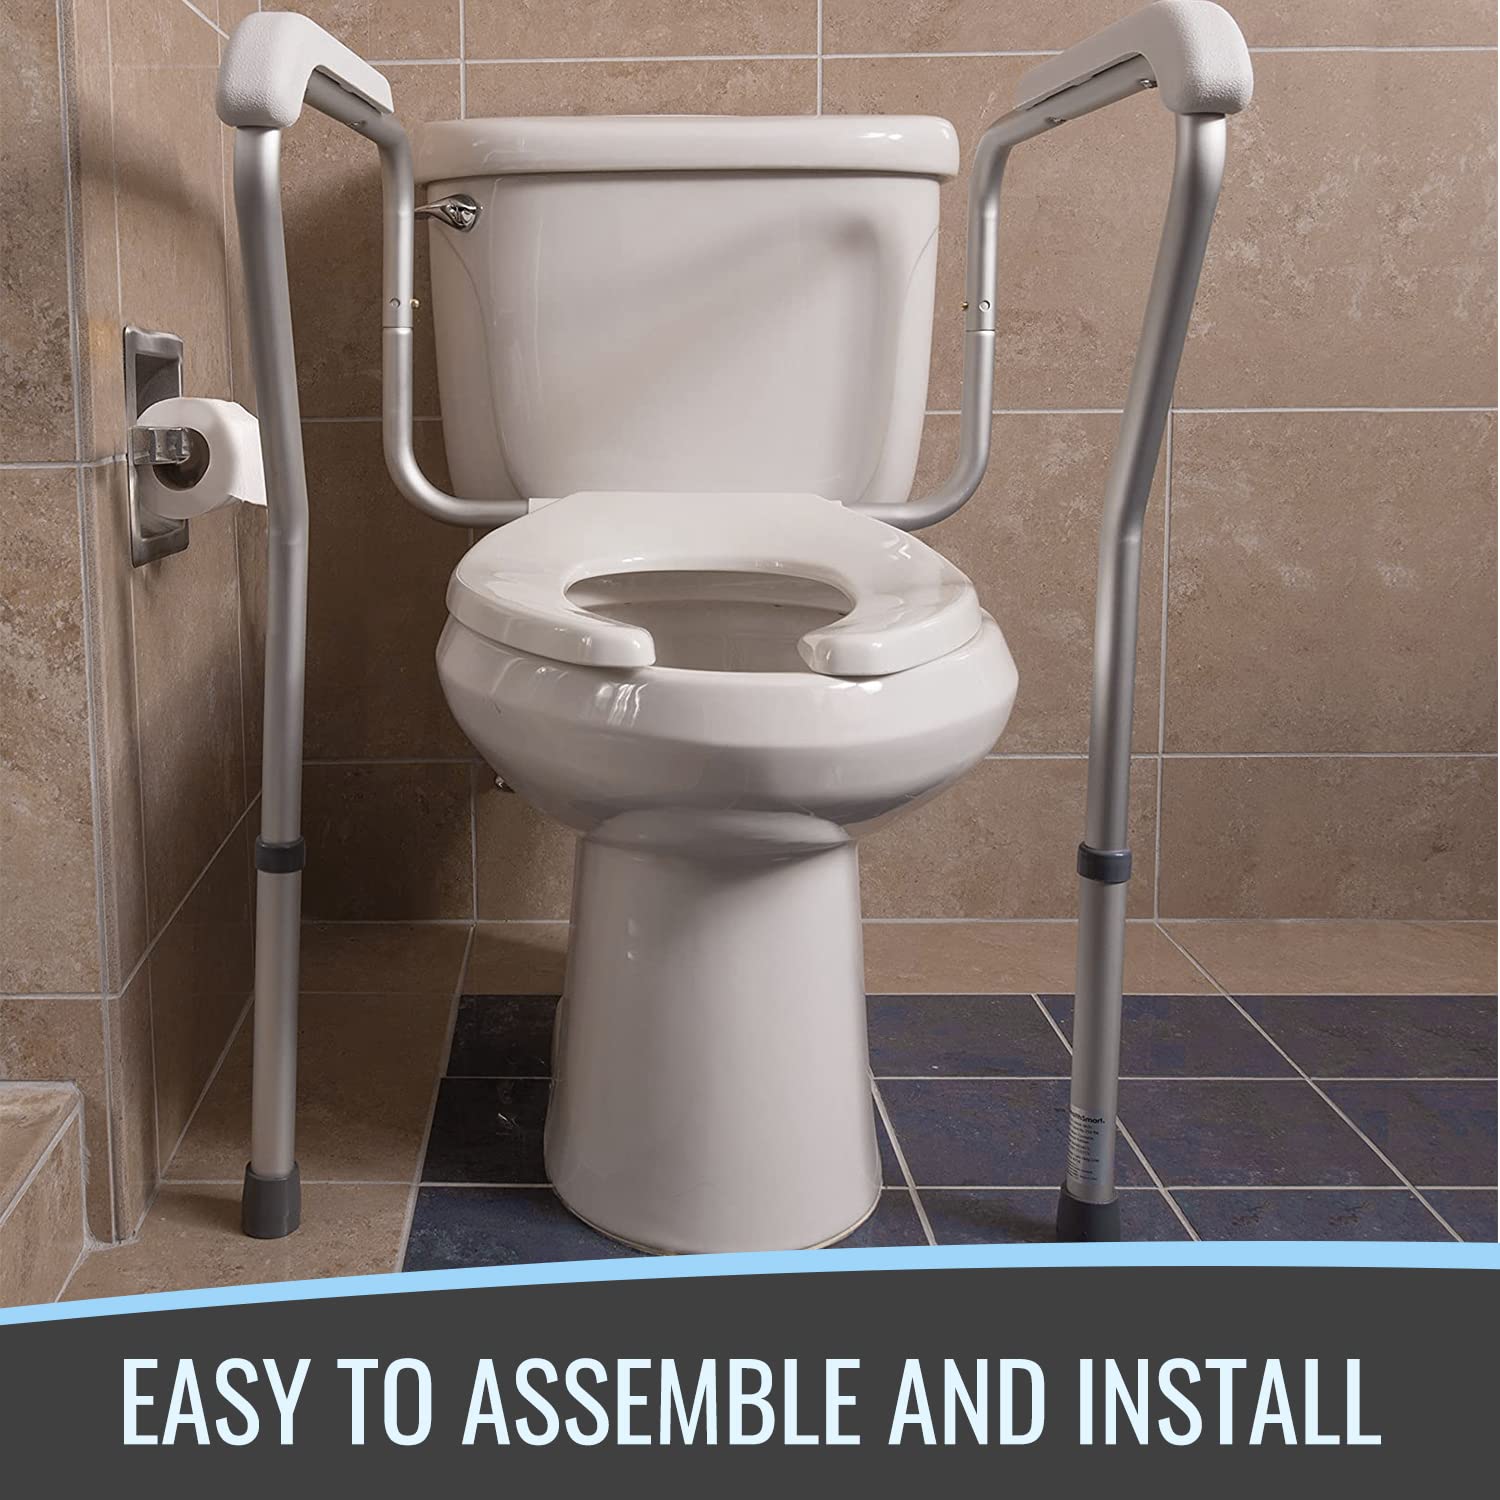 HealthSmart Toilet Safety Rails, Toilet Seat Handles, Safety Frame for Toilet with Adjustable Height, Bathroom Safety & Stability System